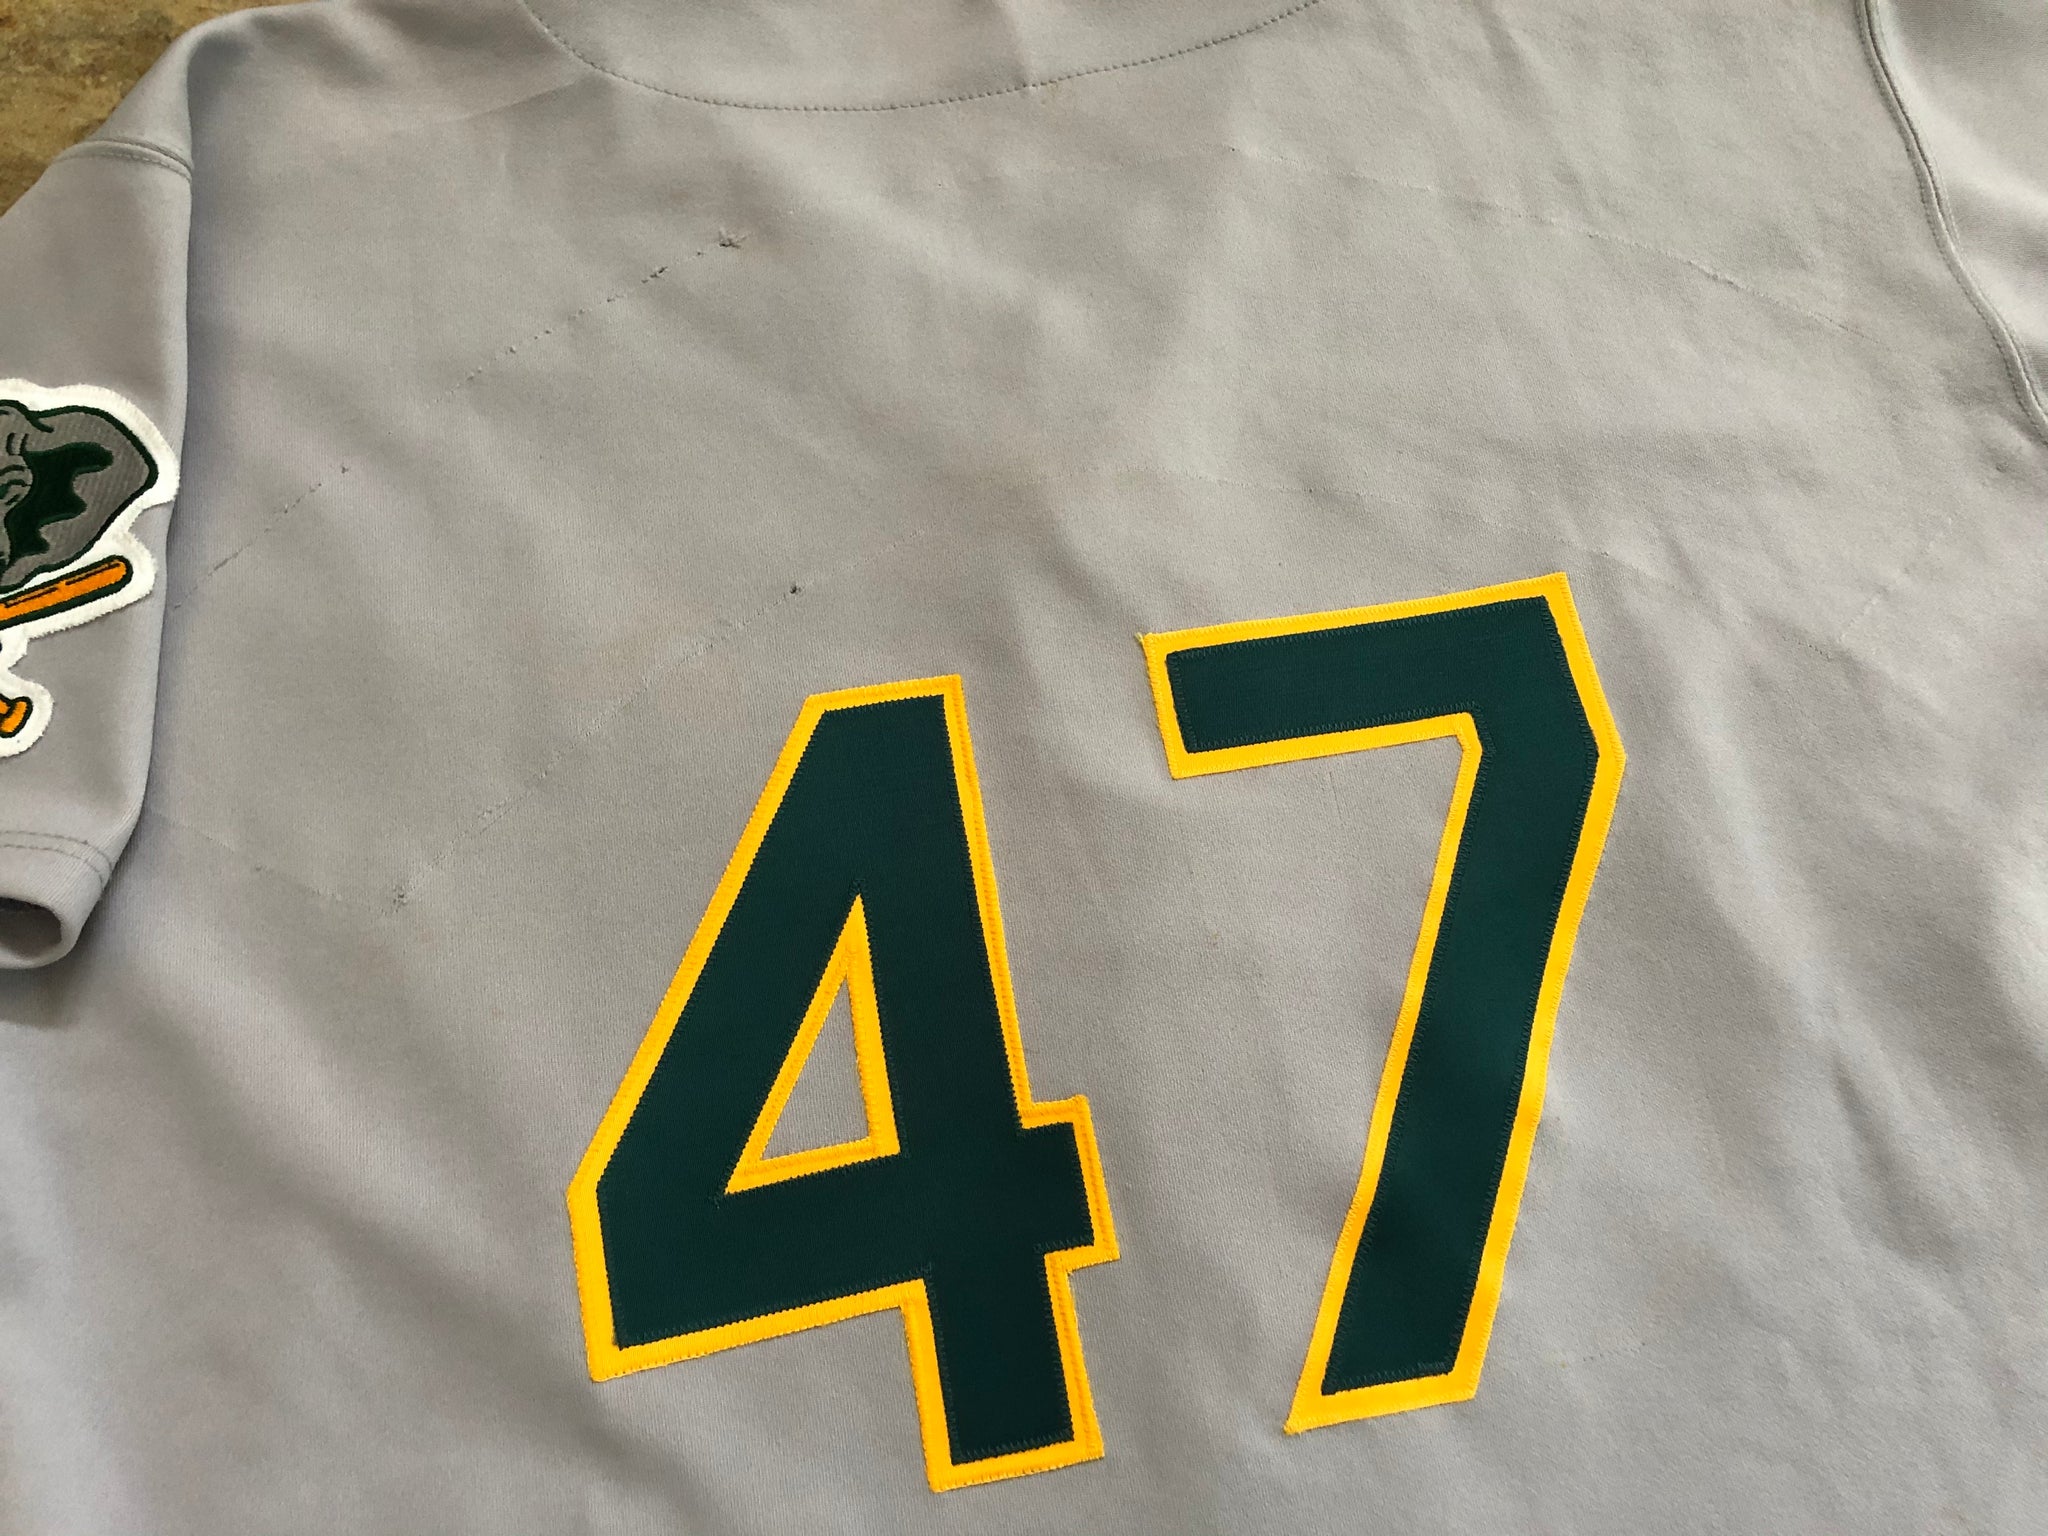 Oakland A's Athletics Blank Game Issued Grey Jersey 48 DP48187